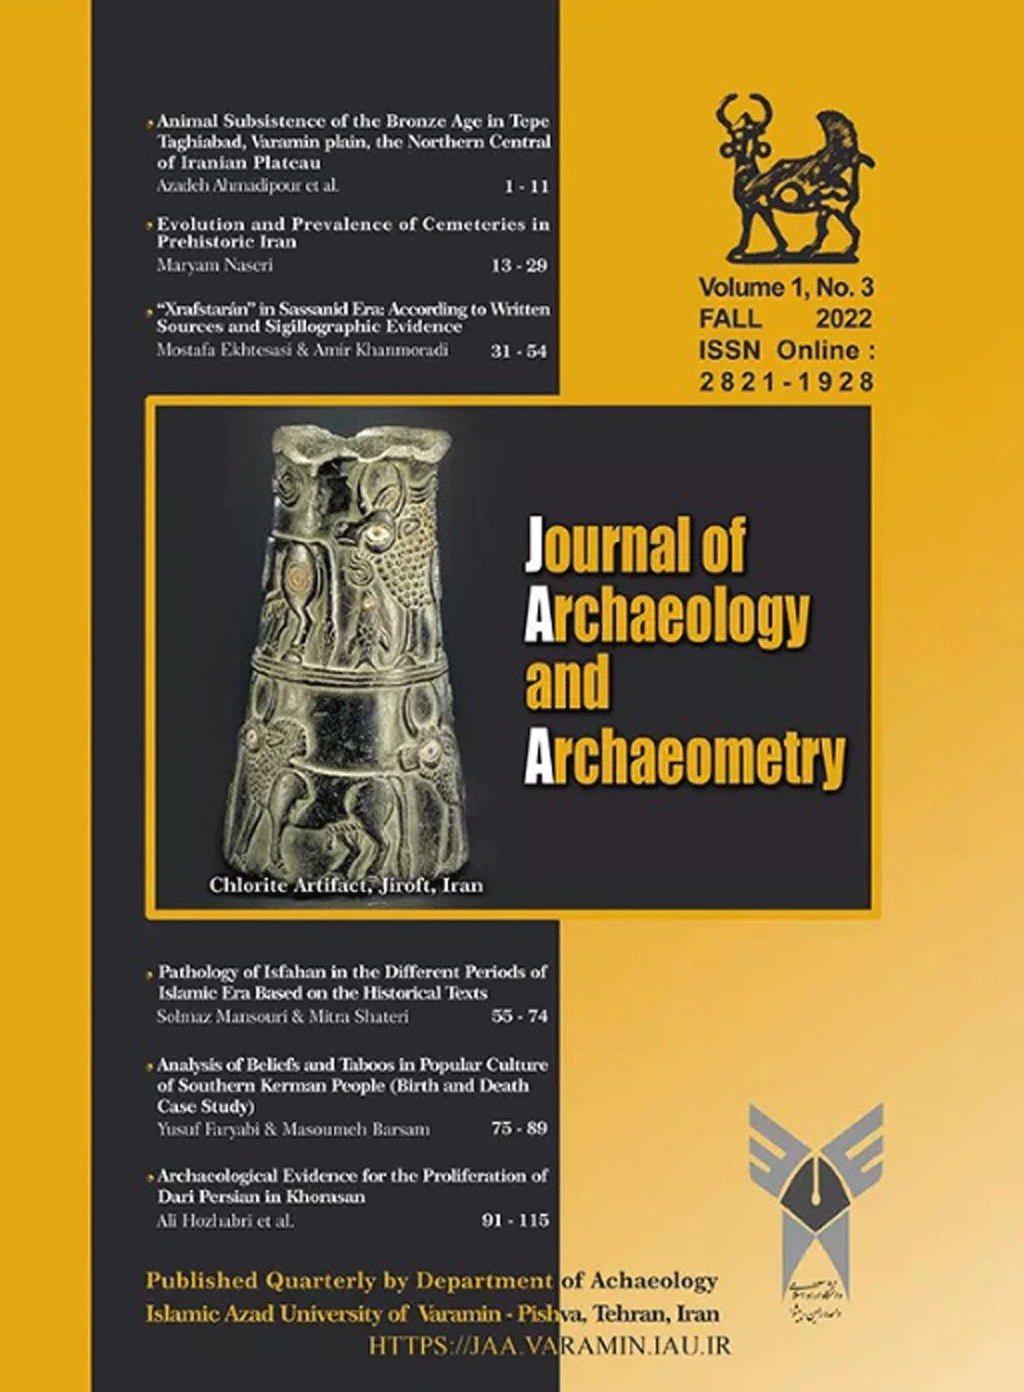 Archeology and Archaeometry - August 2022, Volume 1 - Number 2